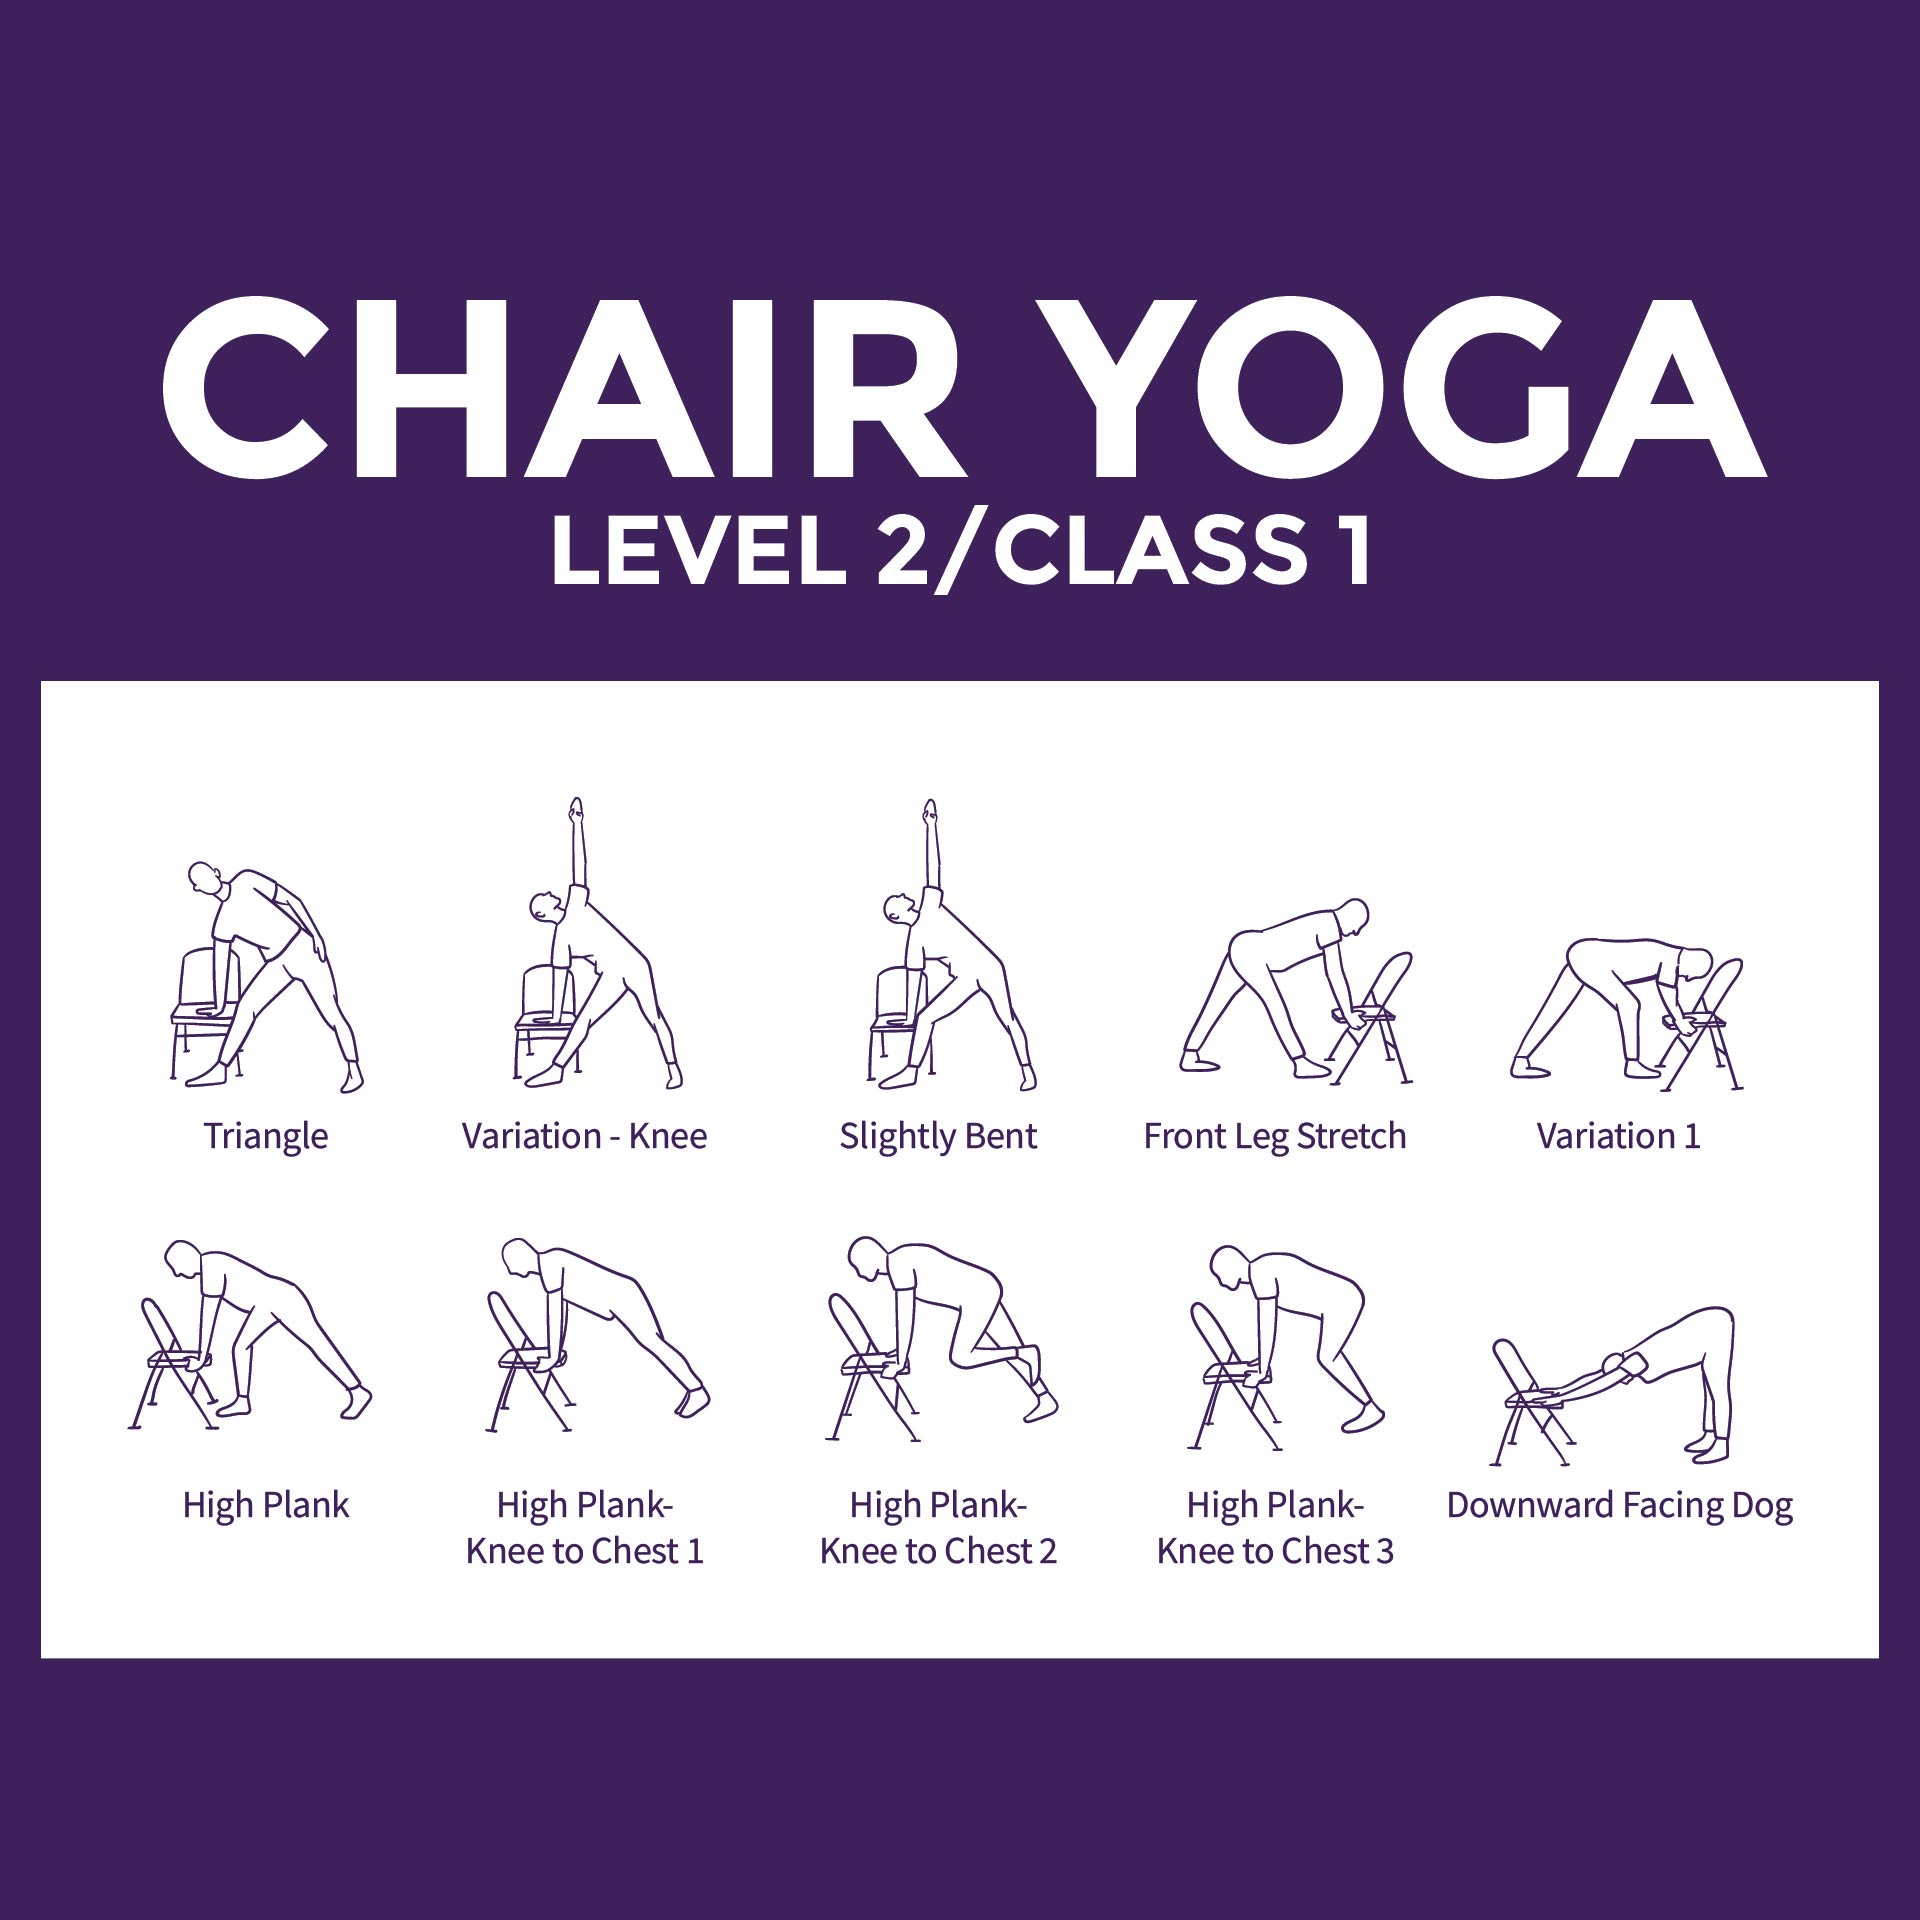 8 Best Images of Printable Chair Exercises Senior Chair Yoga